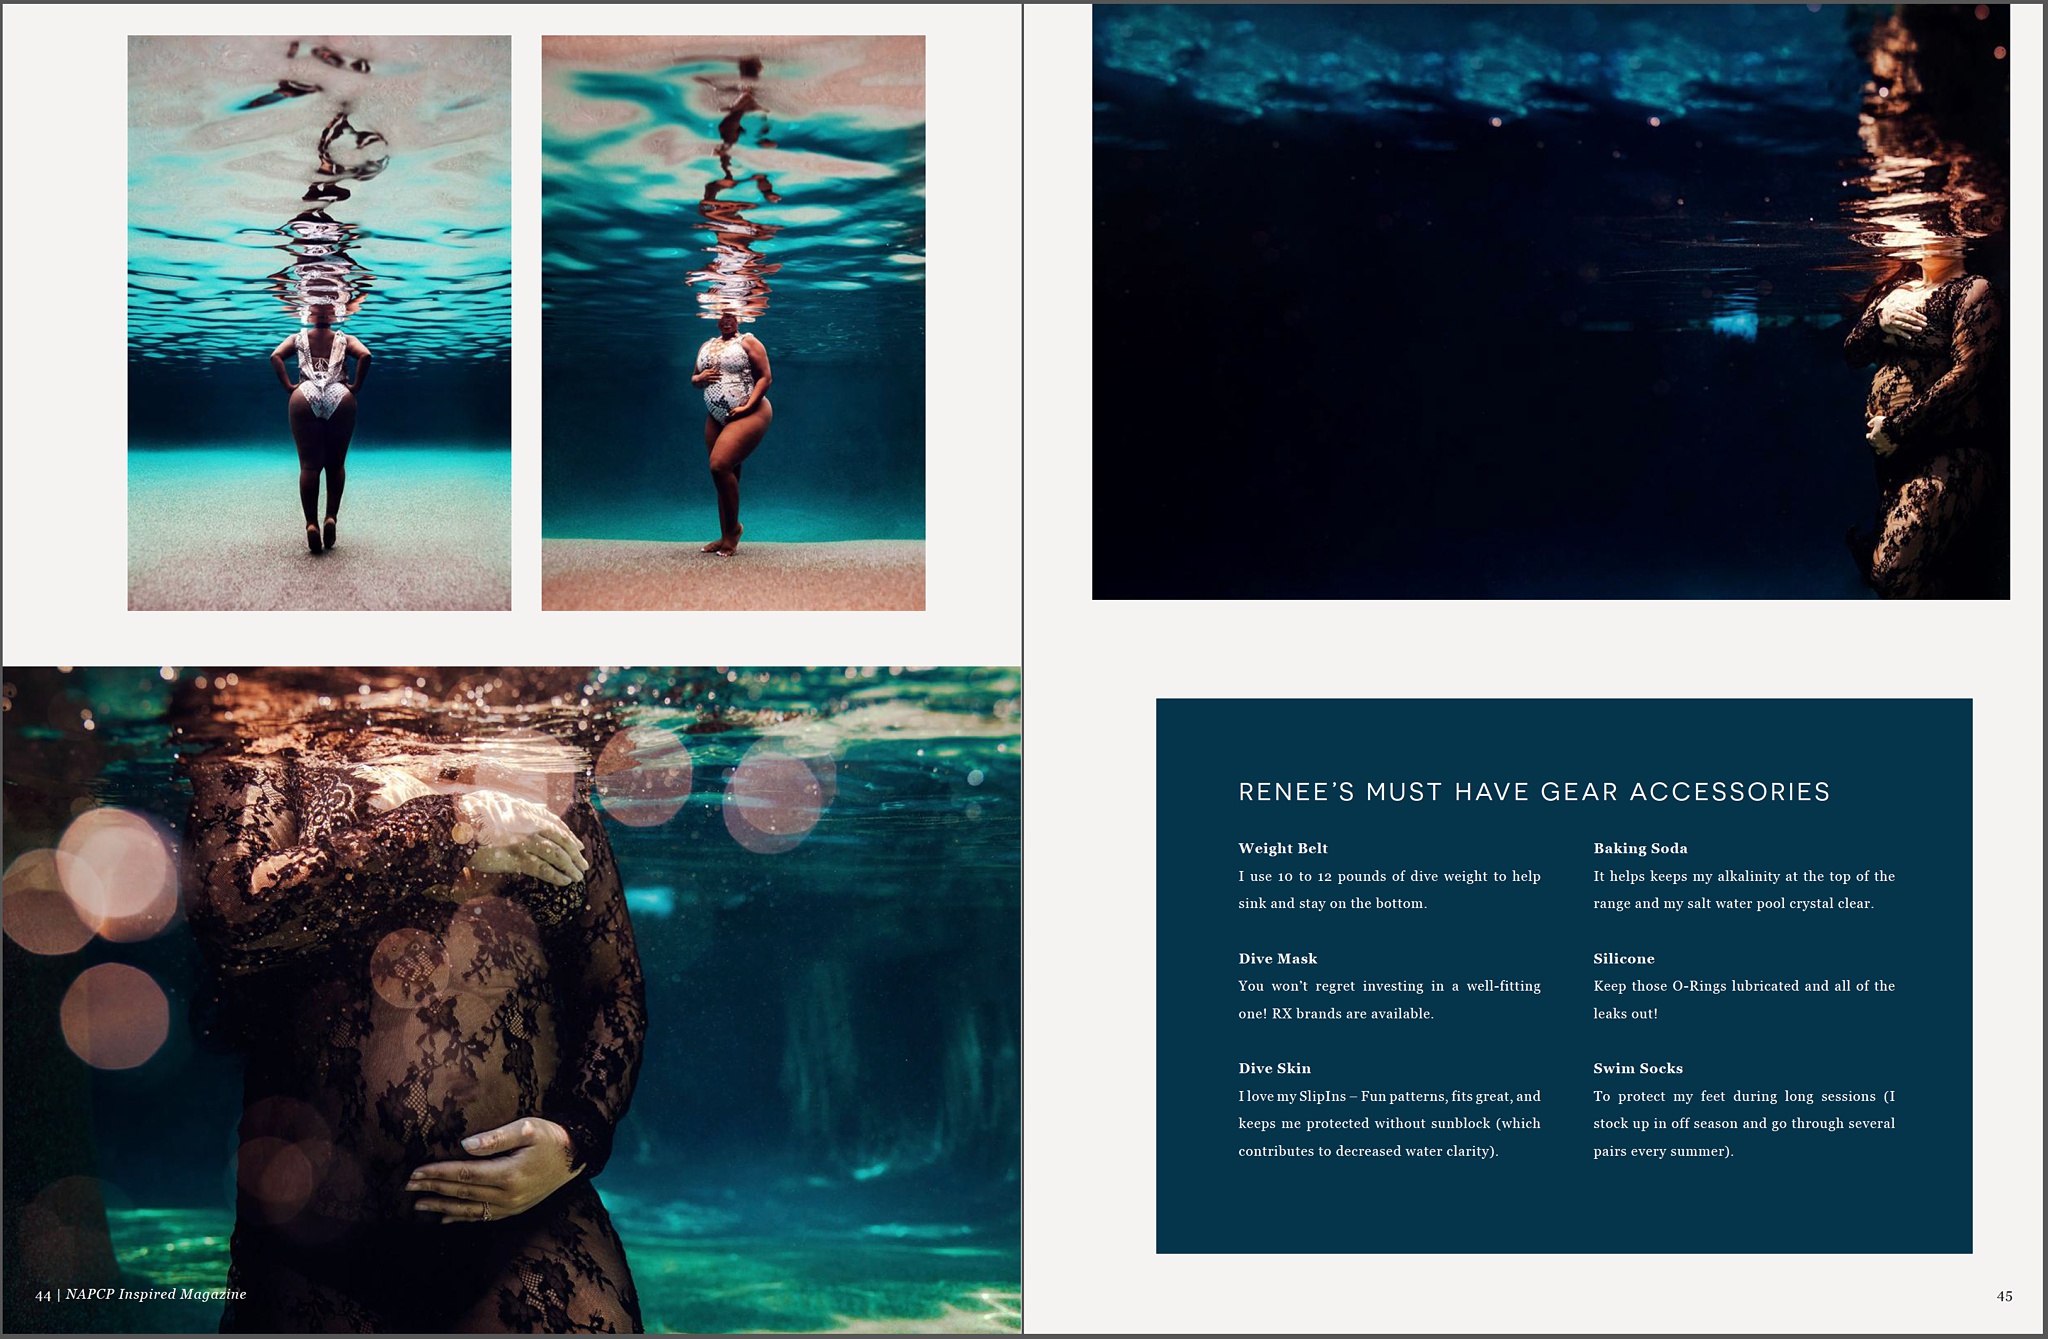 Top Gear for Underwater Maternity Portraits